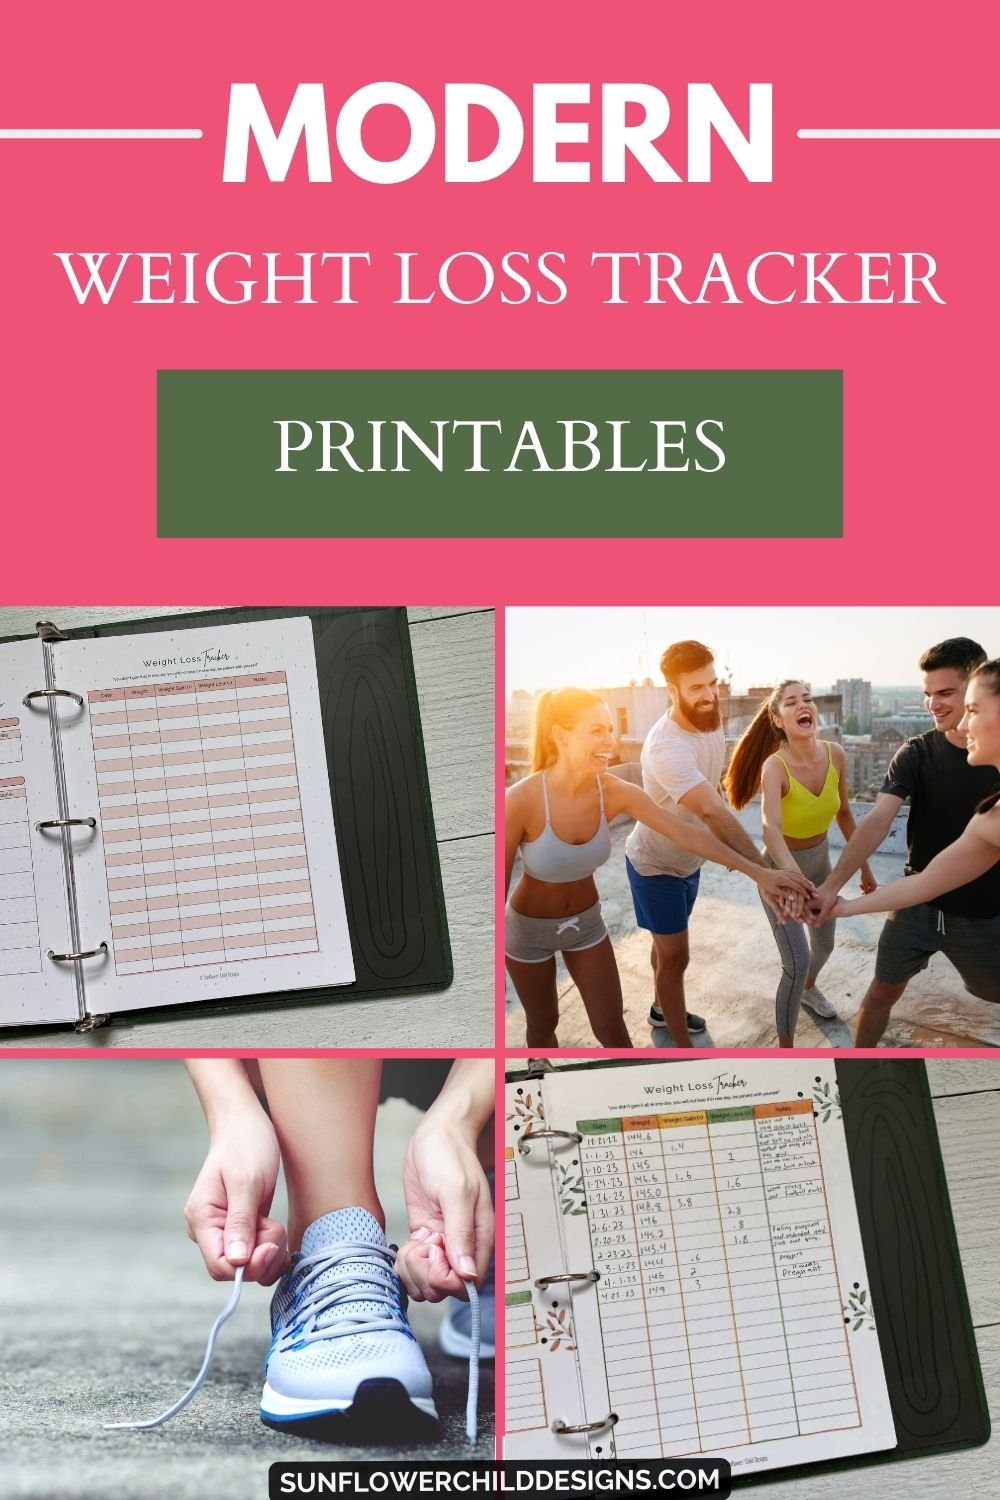 Kickstart Your Slim-Down Journey with Our Stylish Modern Weight Loss Tracker Printable!